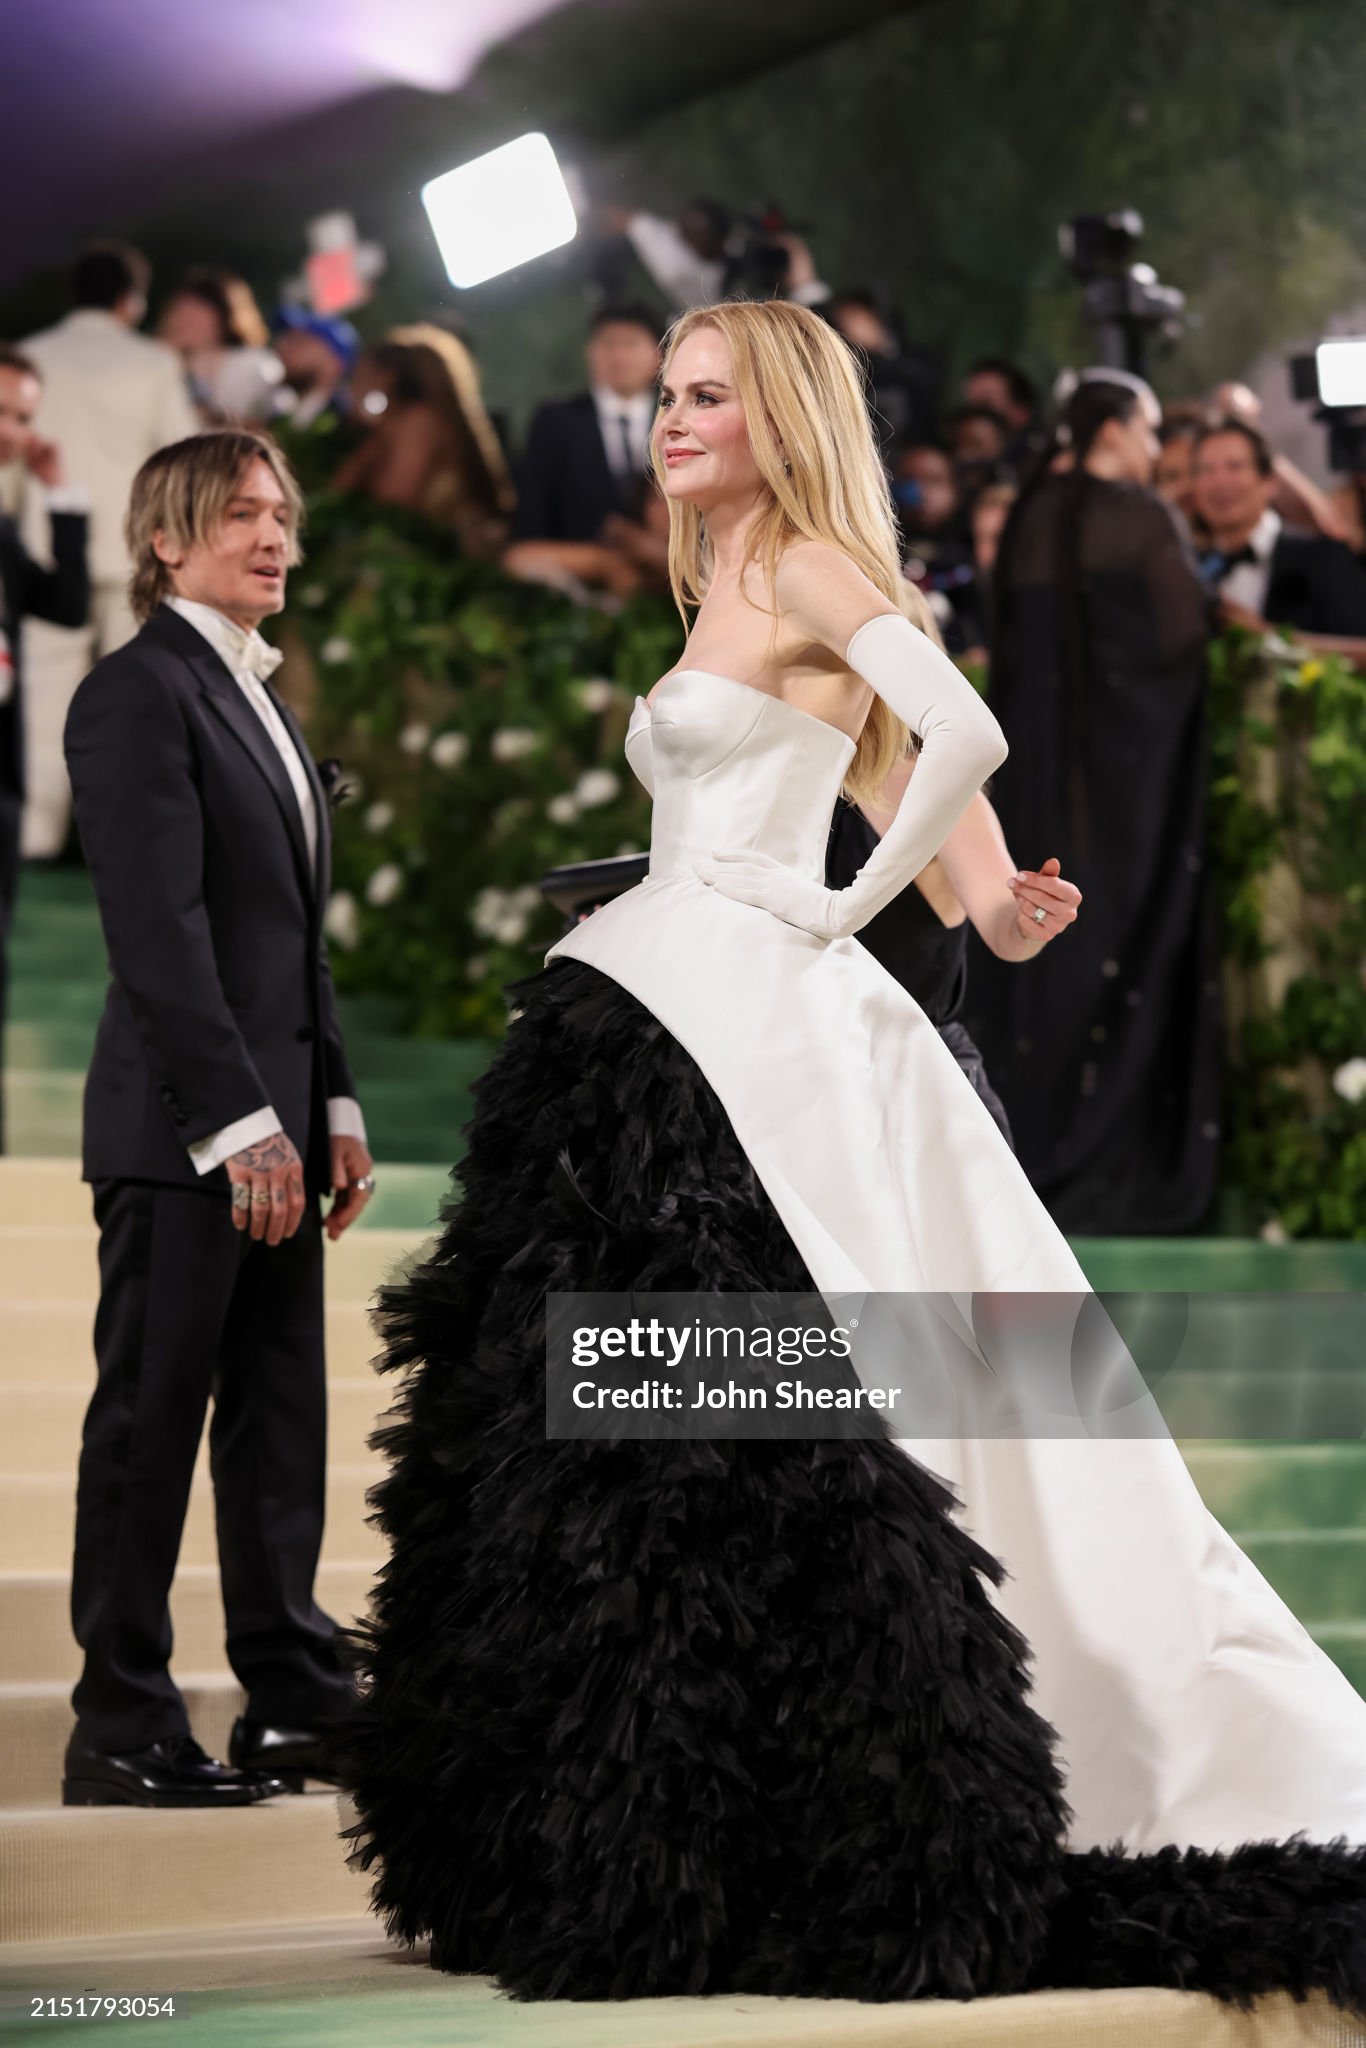 gettyimages-2151793054-2048x2048.jpg